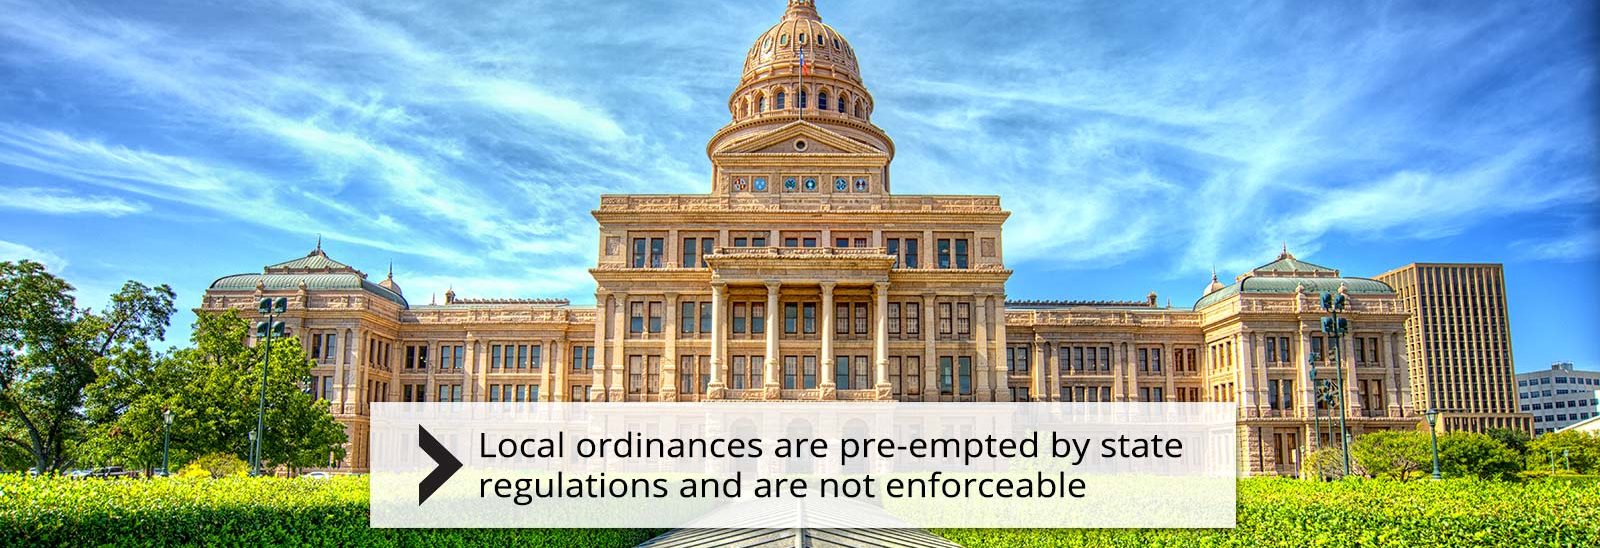 Local ordinances are pre-empted by state and federal regulations and are not enforceable.